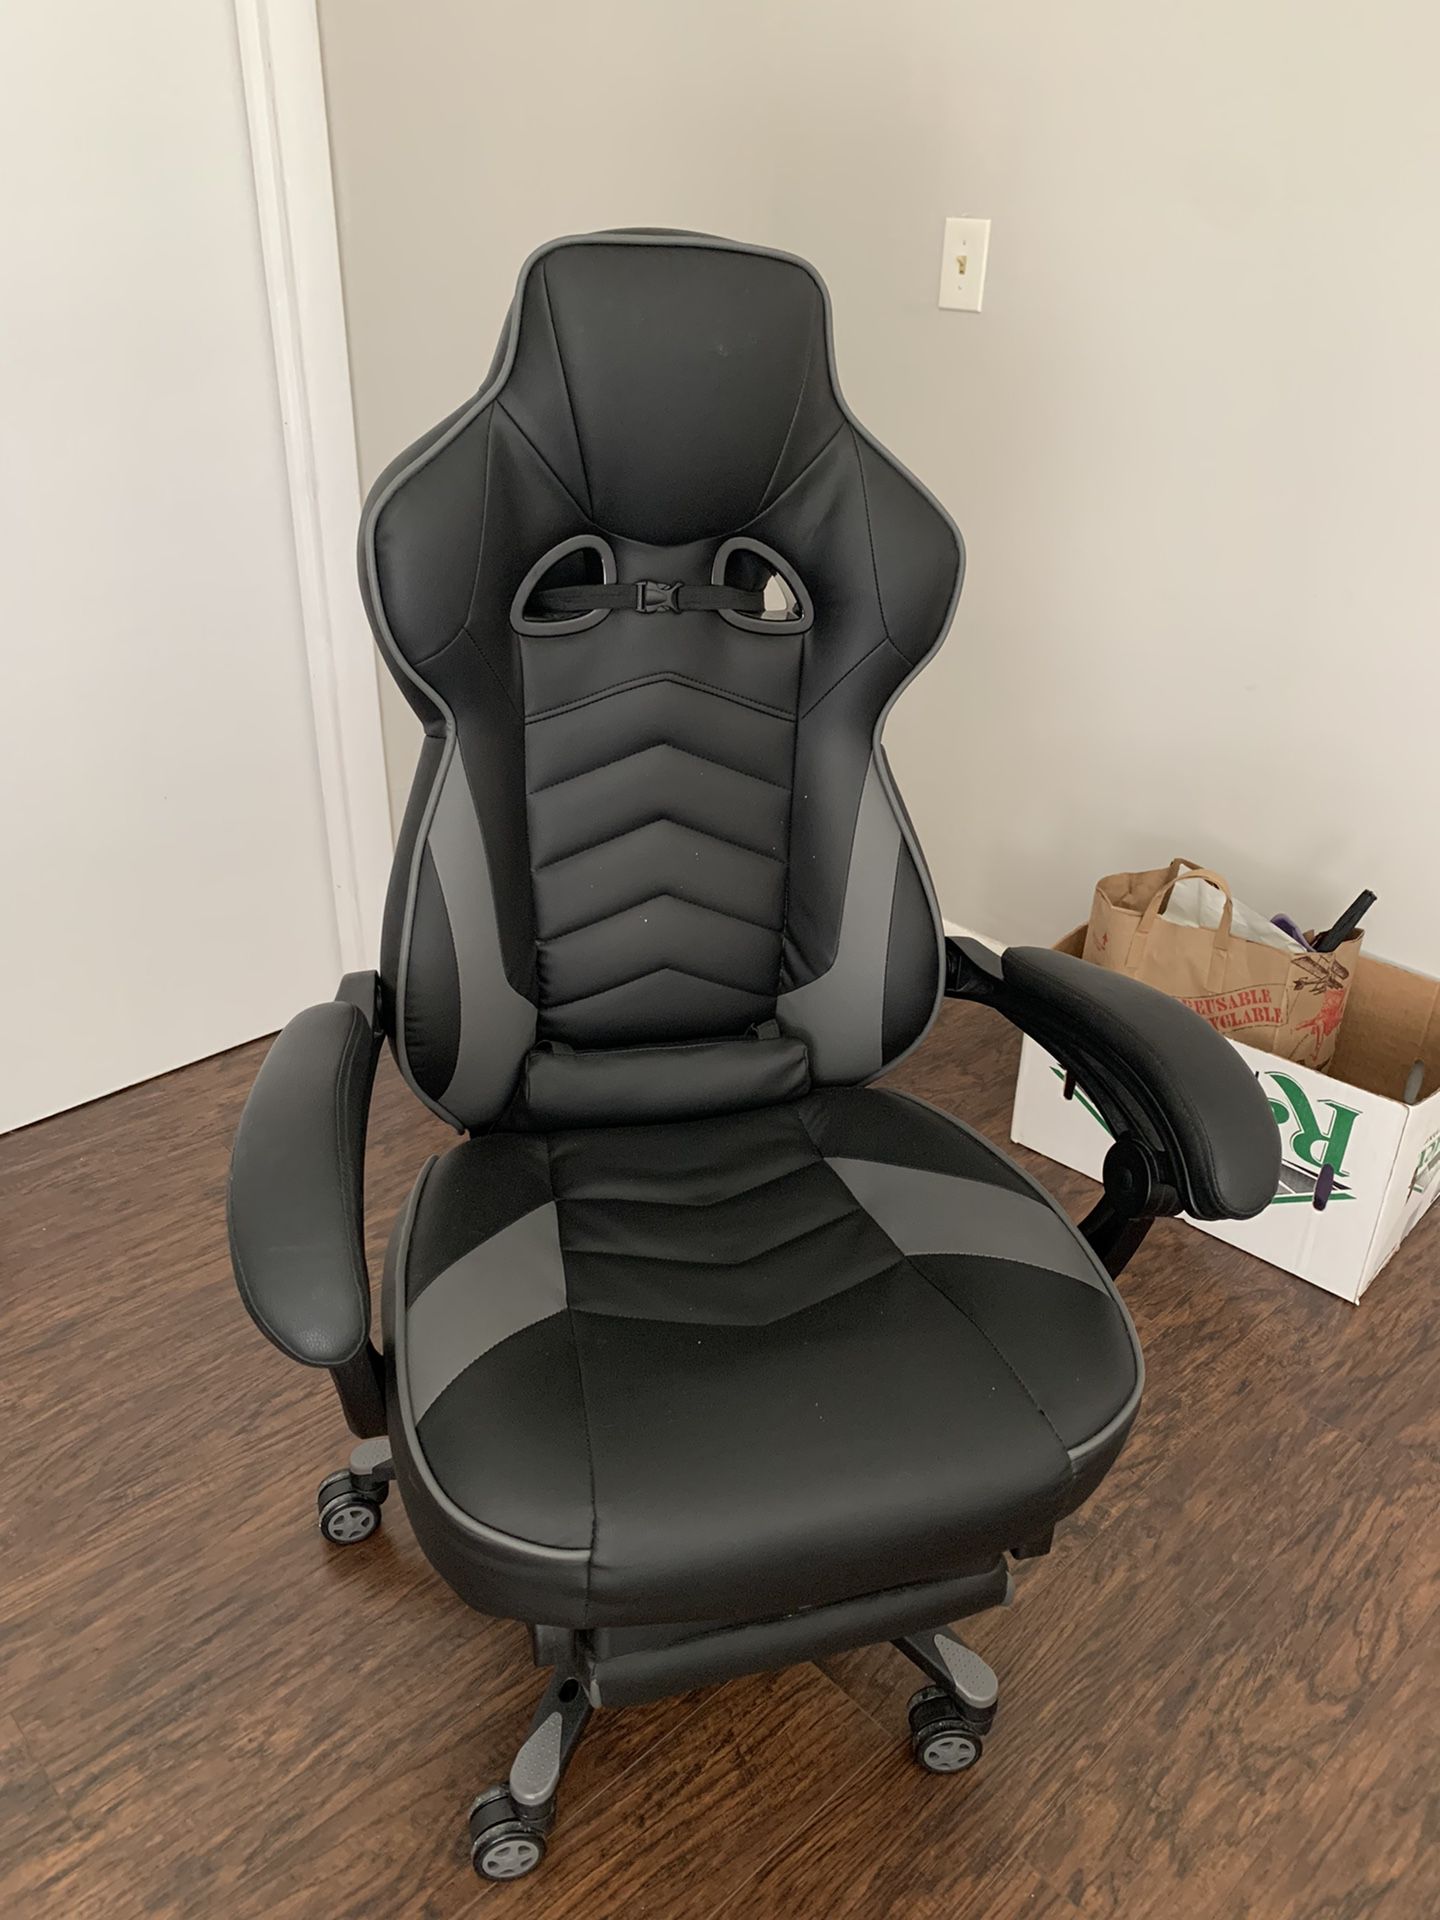 Gaming/Desk Chair